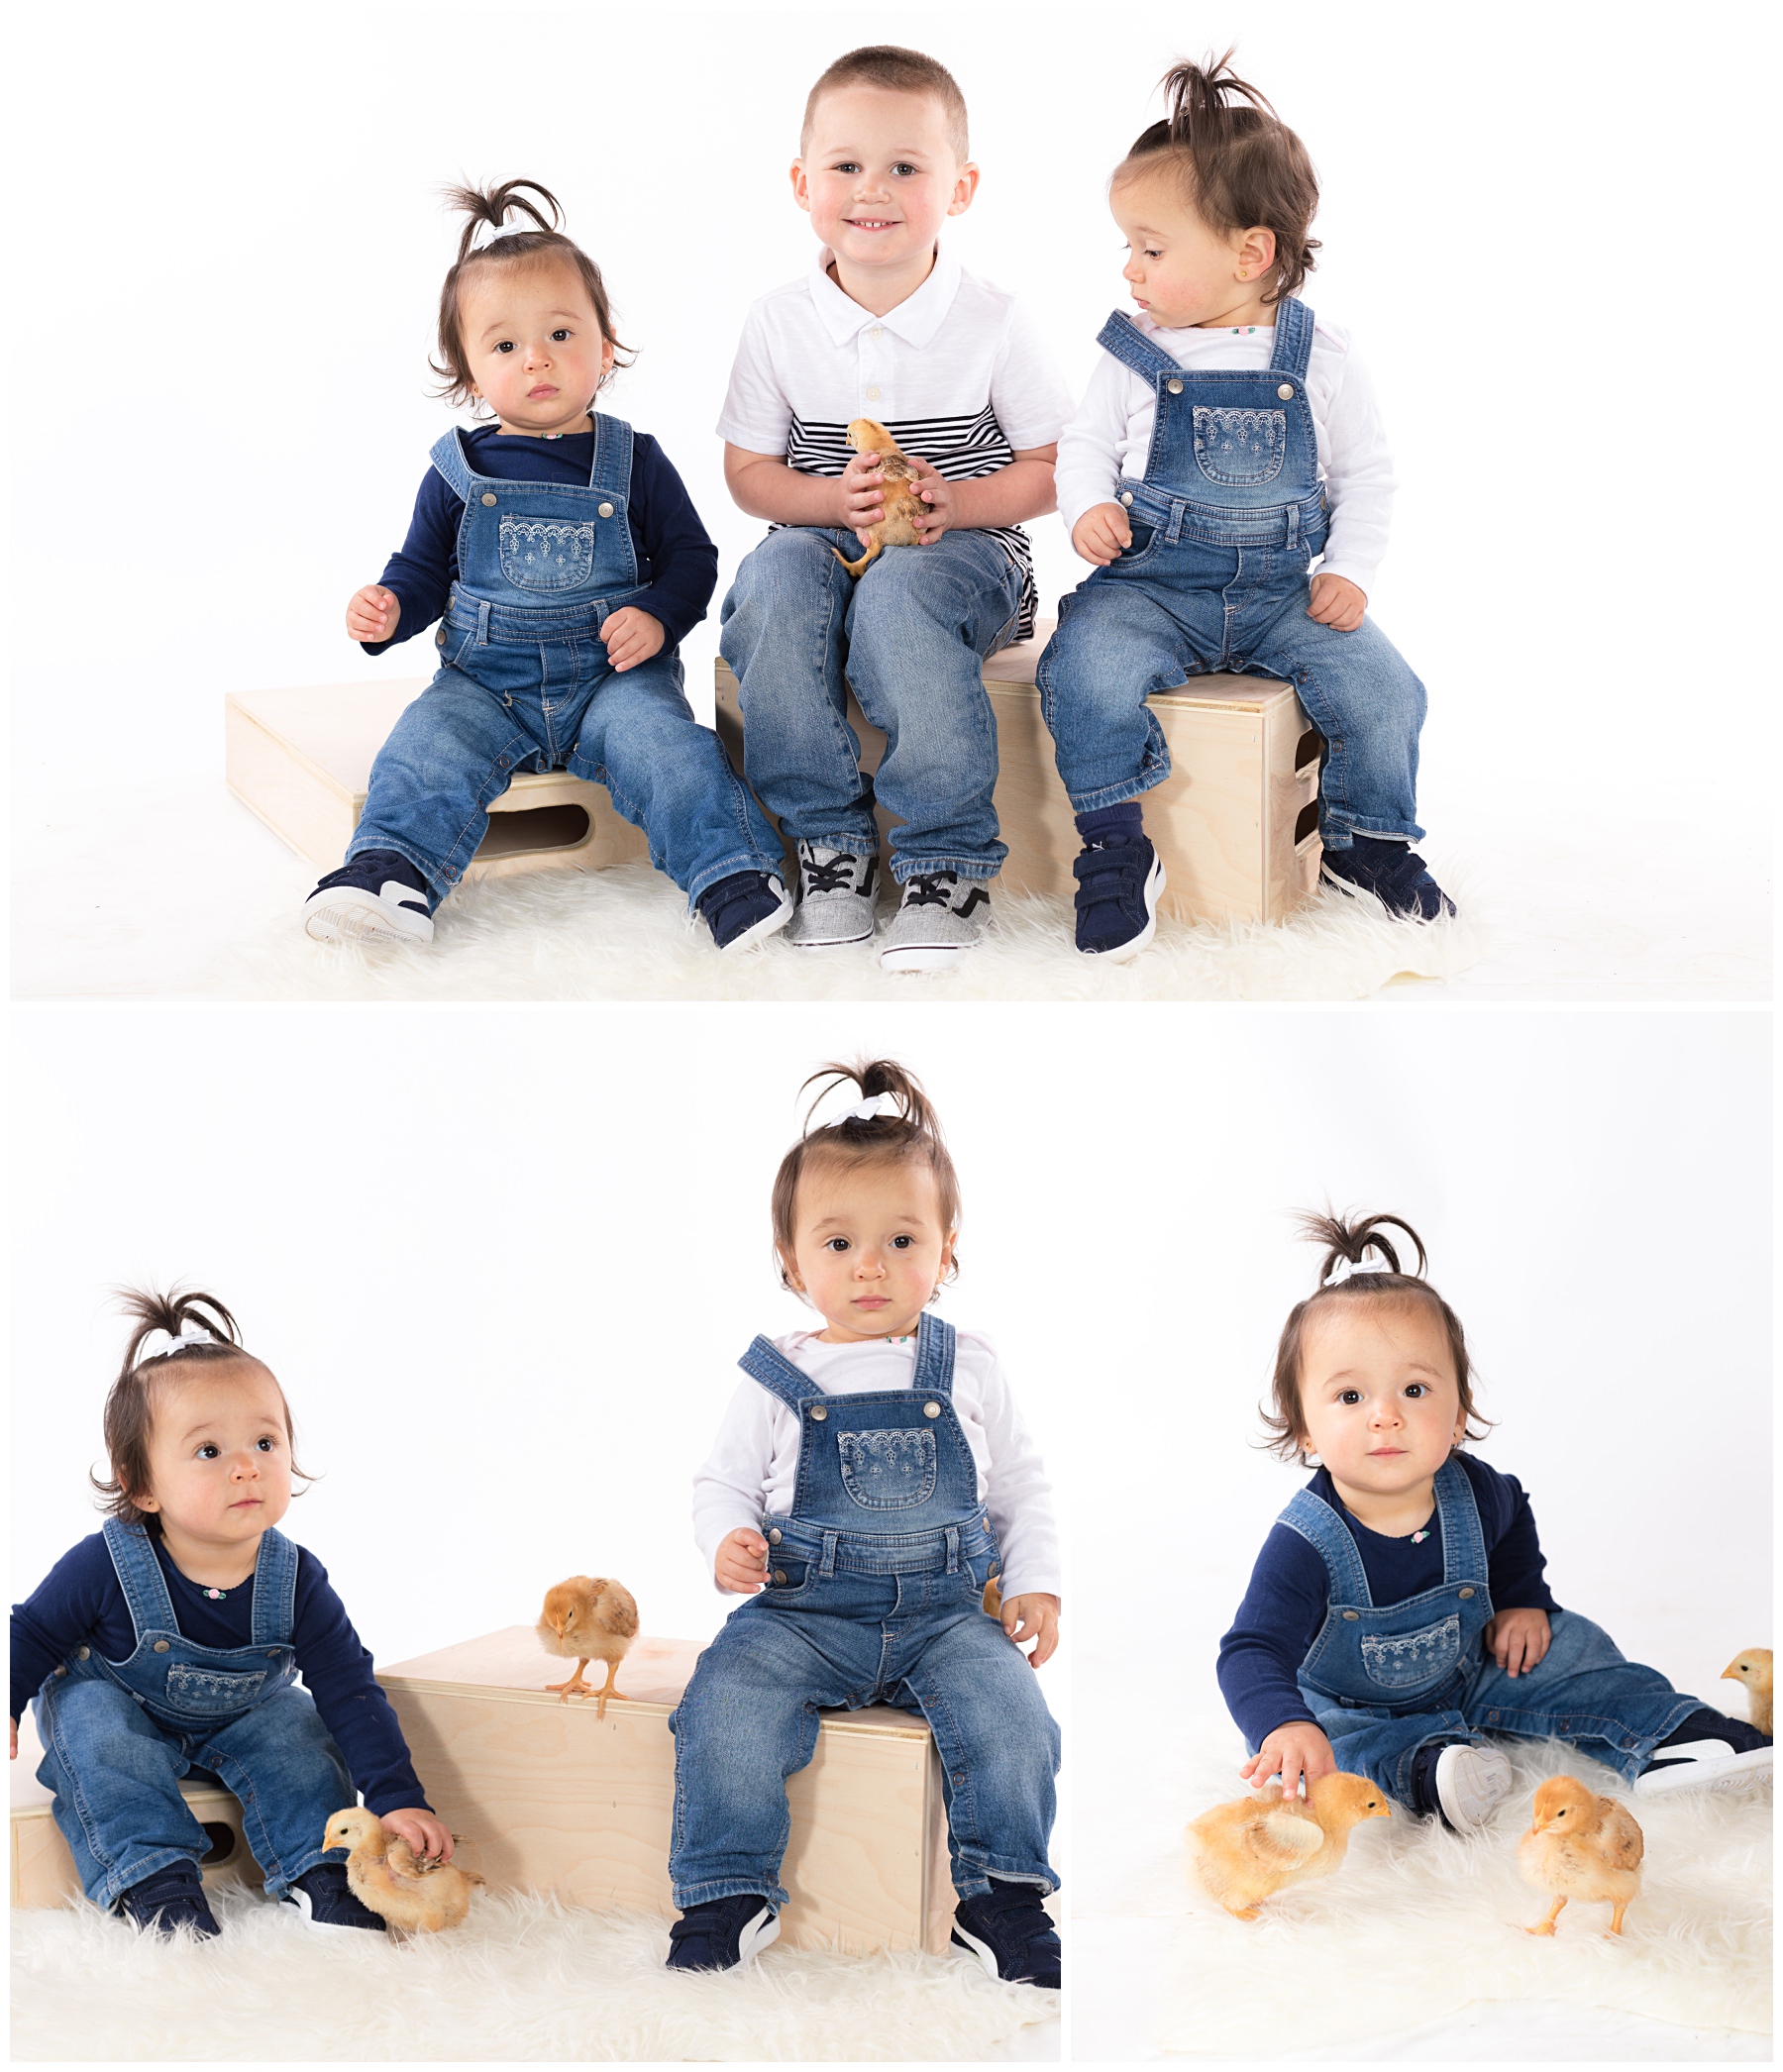 Sibling toddler kids portraits with baby chicks